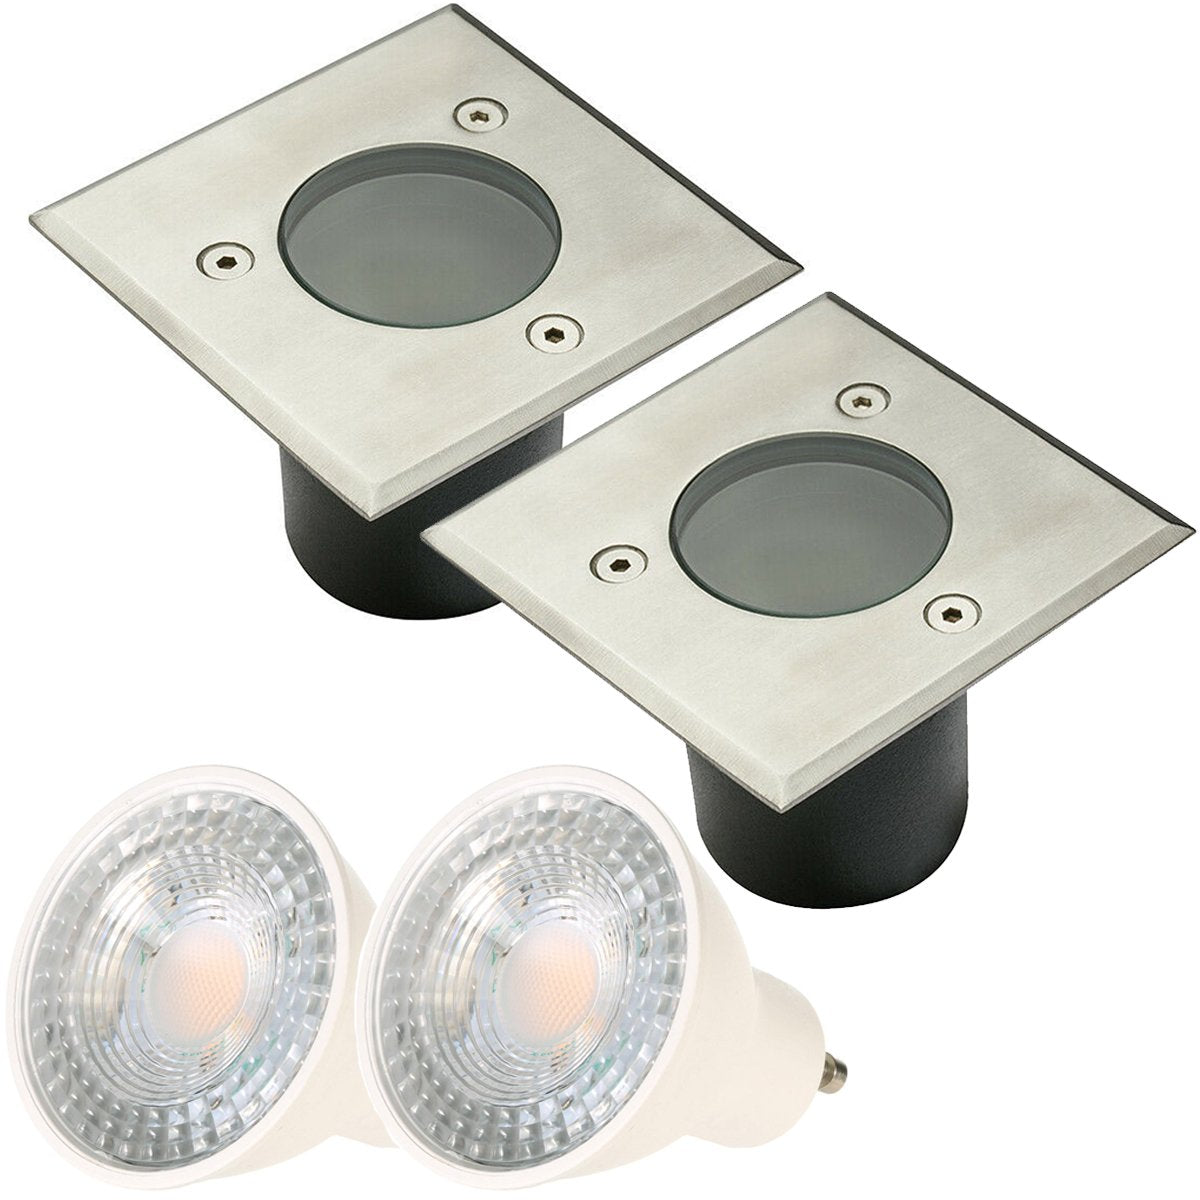 CGC MYAH Two Square Small With Bulbs Stainless Steel Inground Or Decking Lights